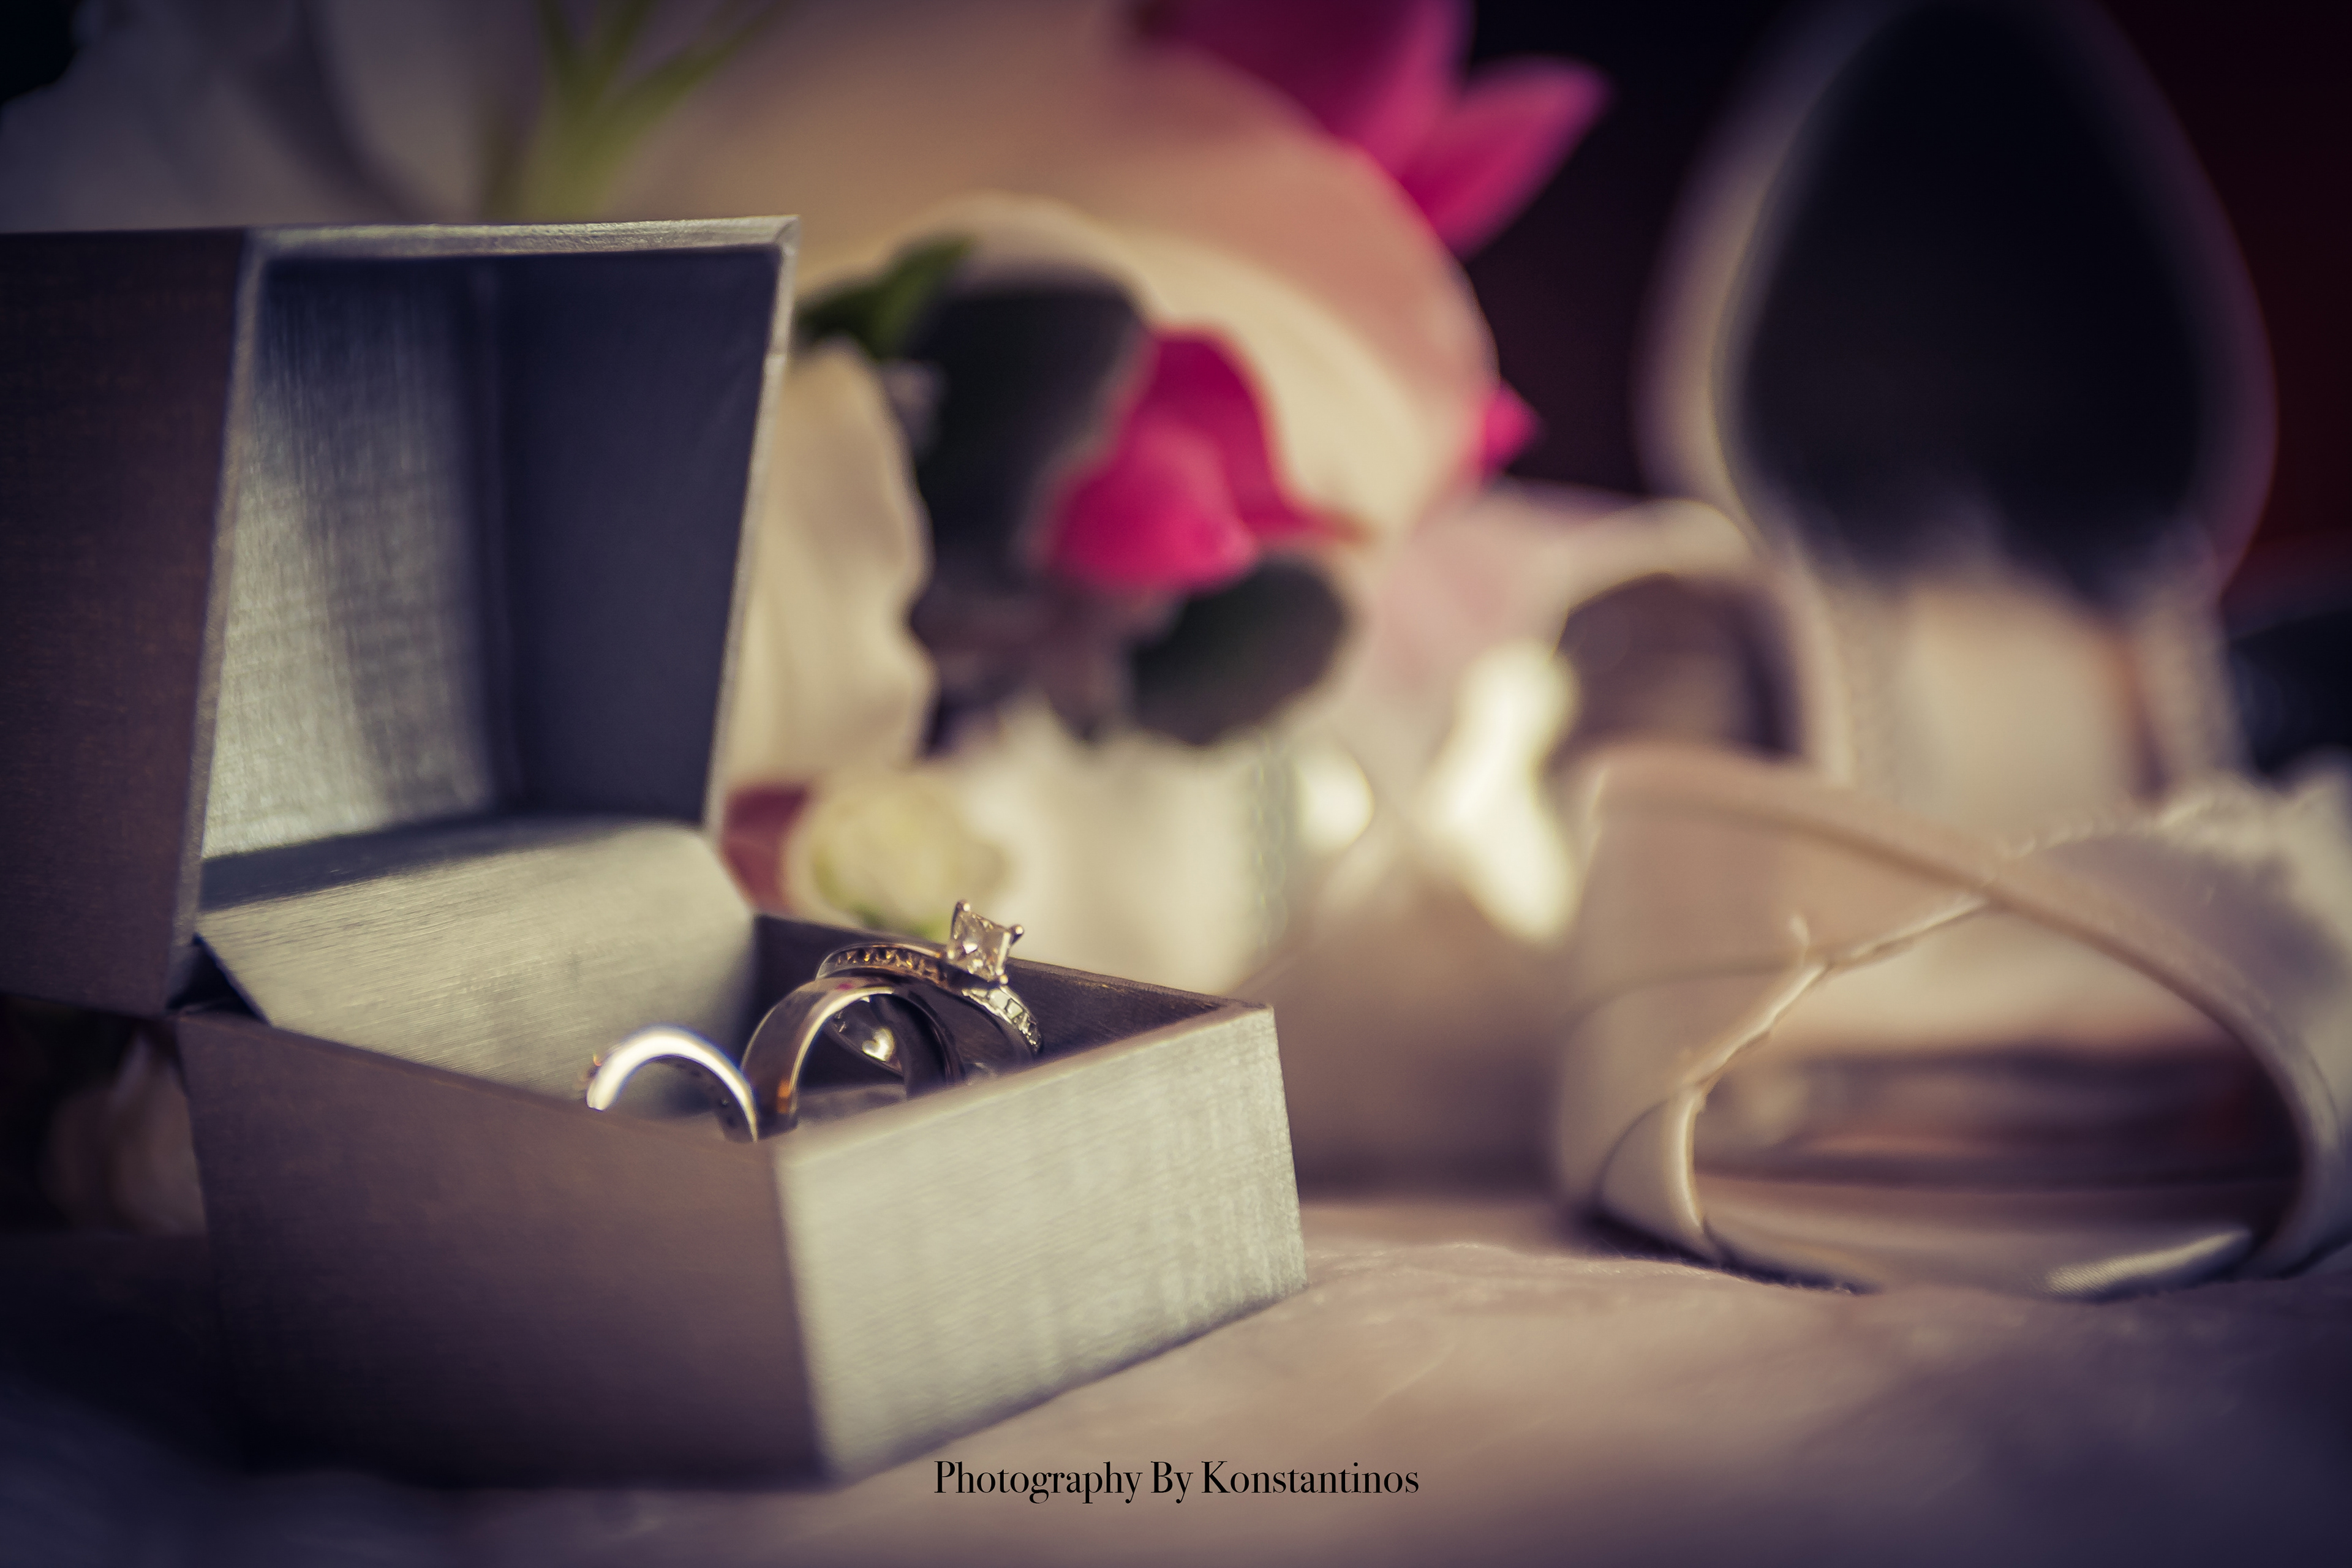 Photography By Konstantino - Western New York Wedding Photography